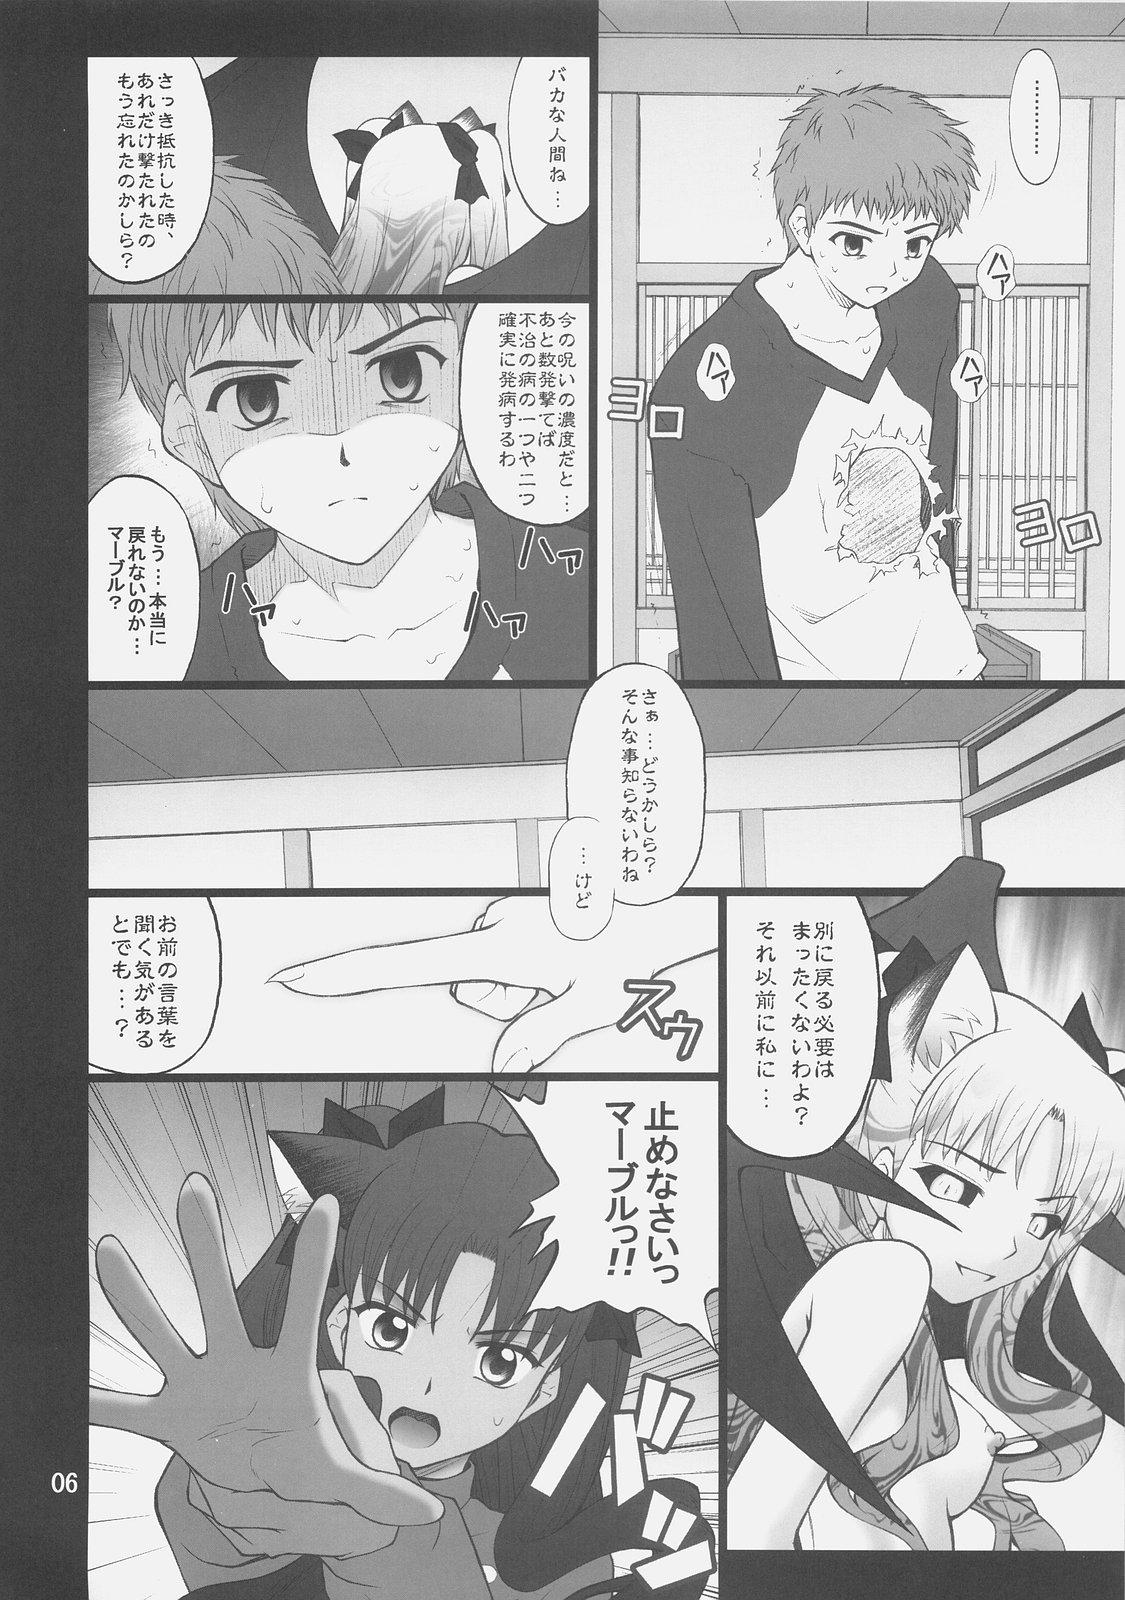 Deutsch Grem-Rin 4 - Fate stay night Fate hollow ataraxia Nipples - Page 5